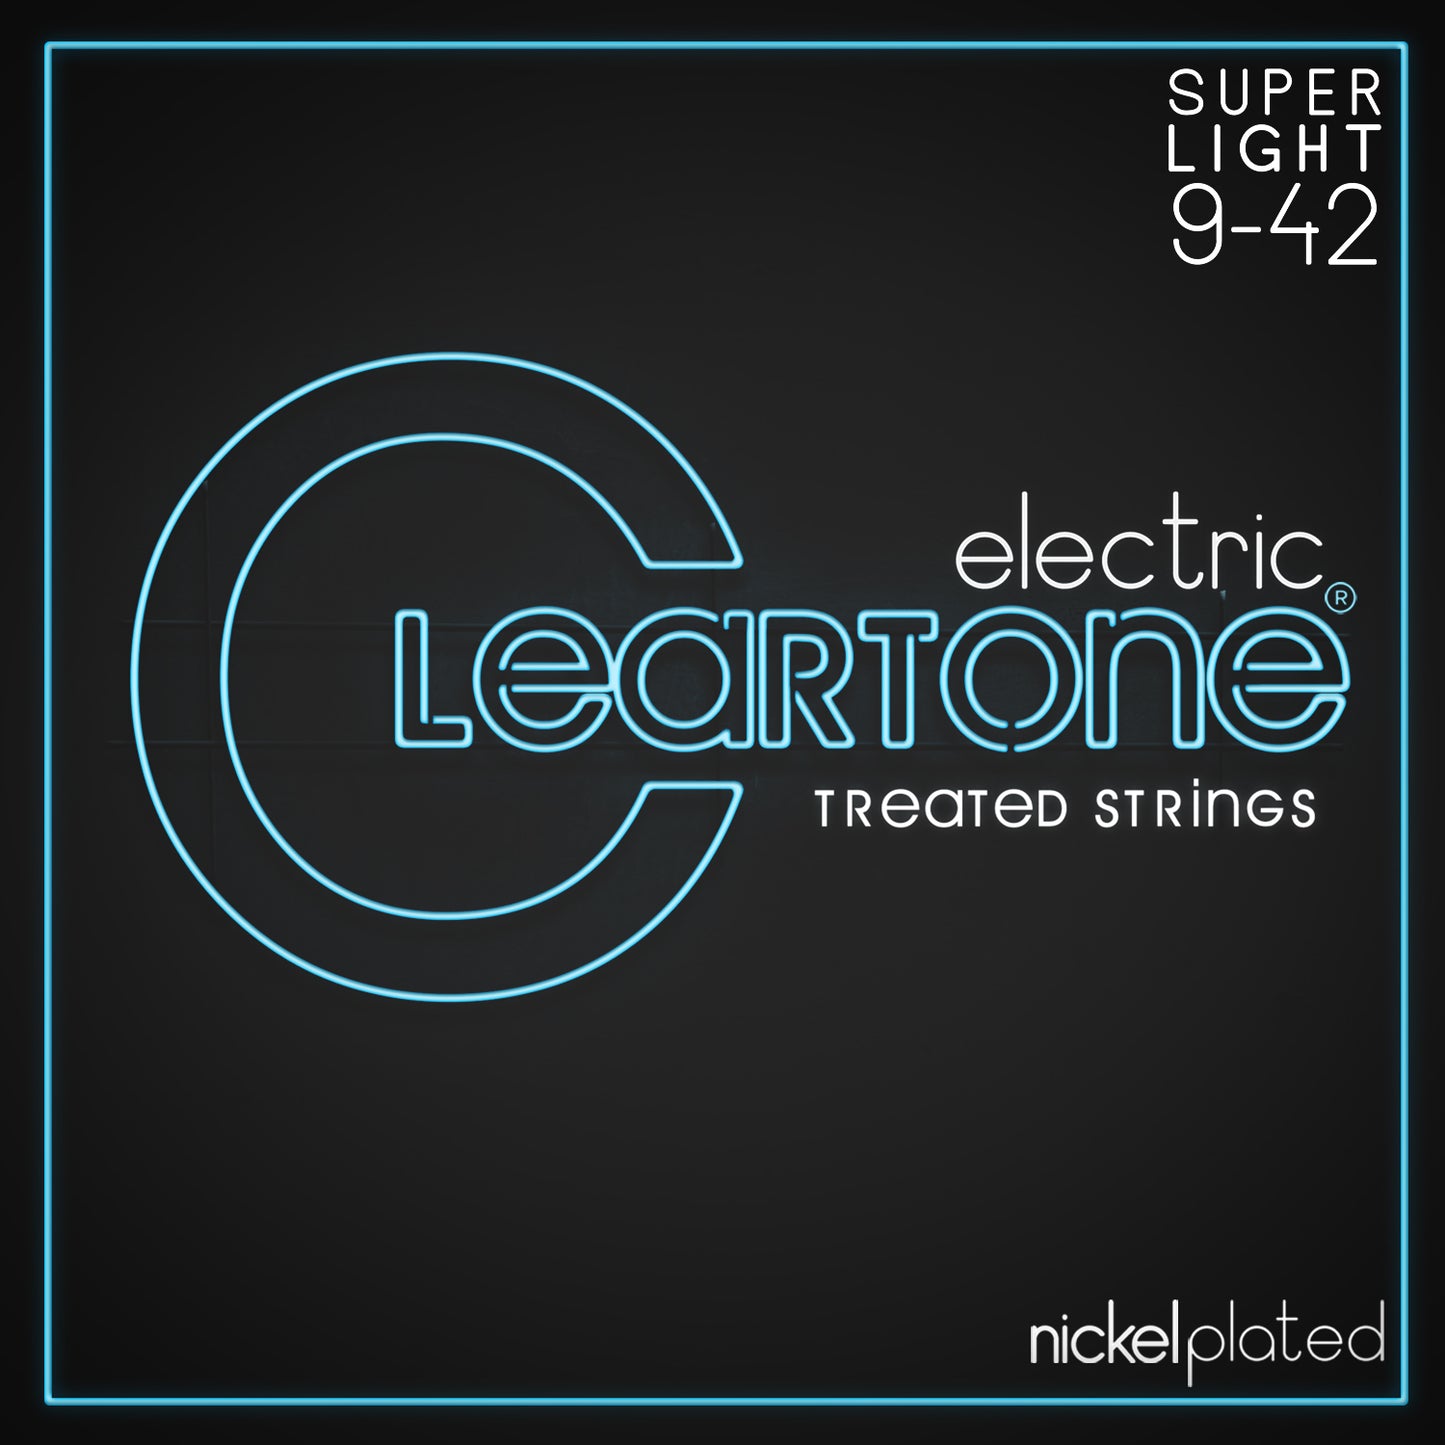 Cleartone Electric Nickel Plated Strings - Cleartone Strings